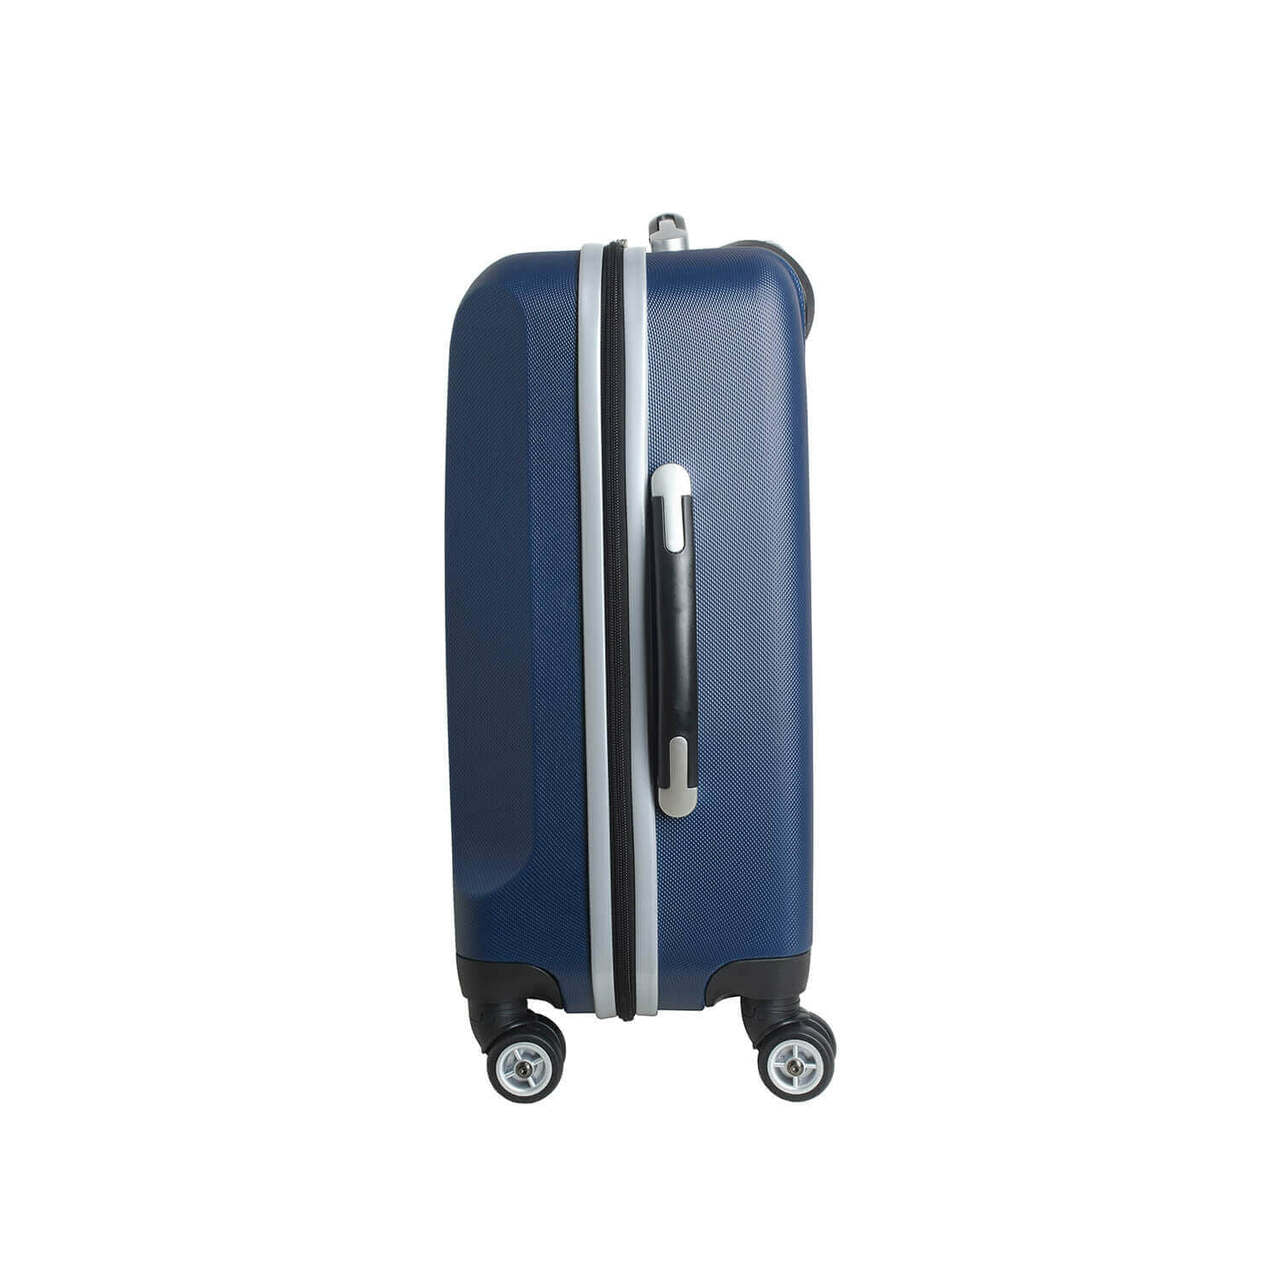 Personalized Initial Name letter "S" 20 inches Carry on Hardcase Spinner Luggage by Mojo in NAVY